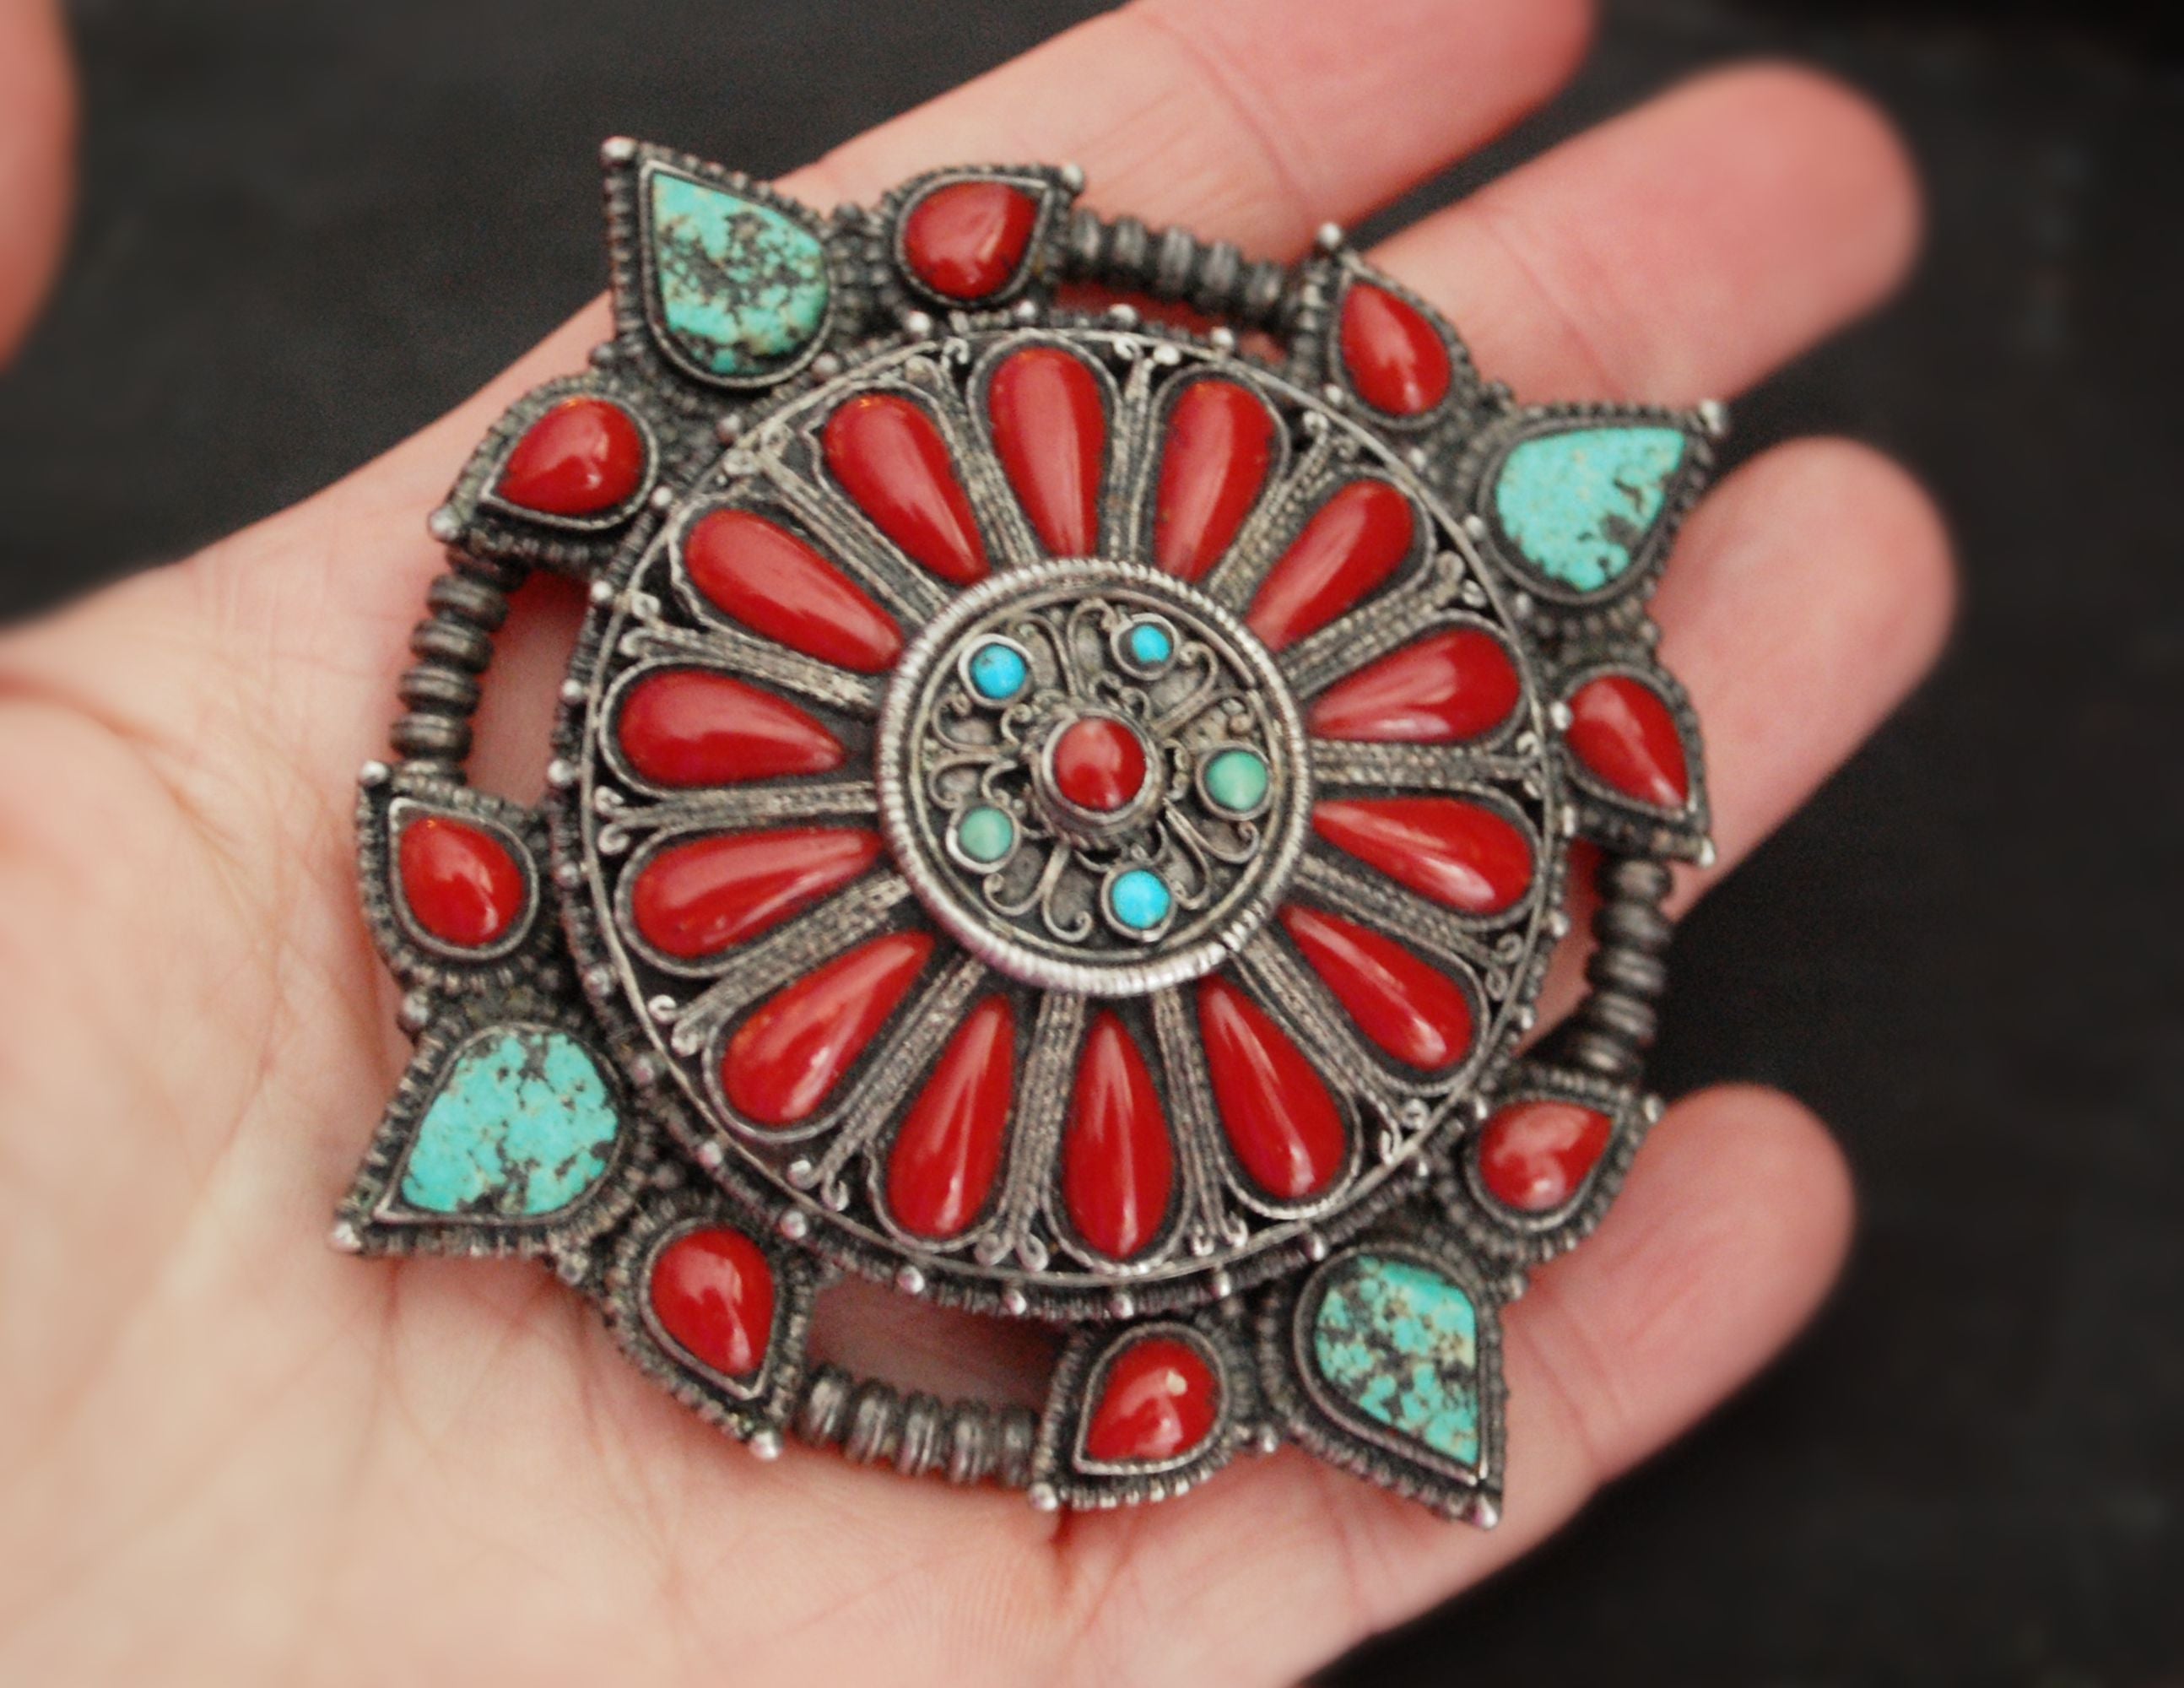 Antique Tibetan Coral and Turquoise Belt Buckle or Pendant